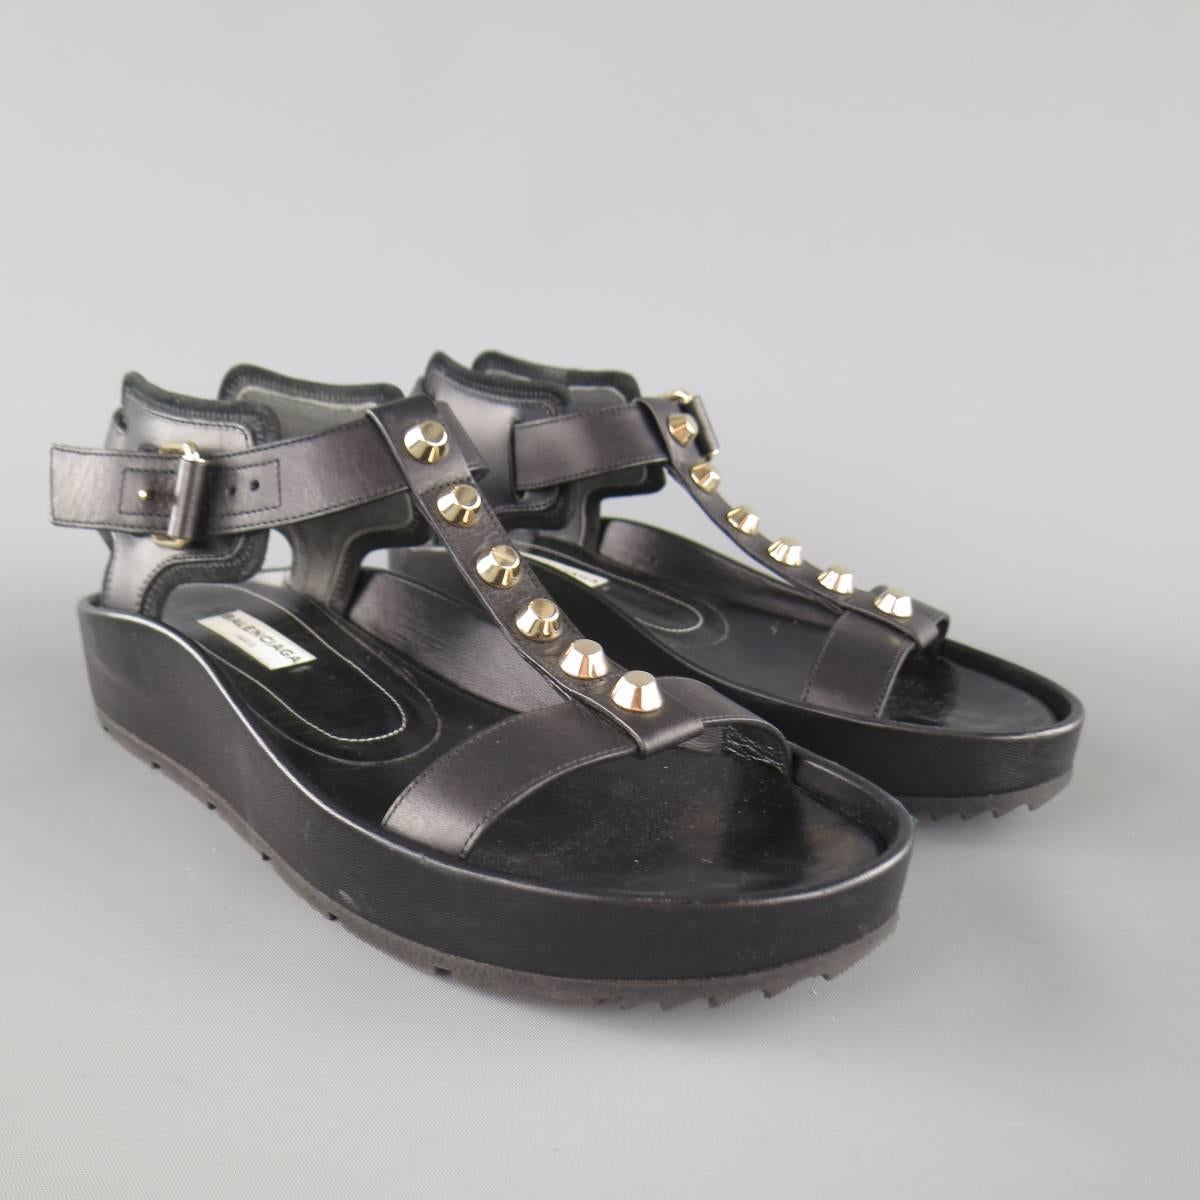 BALENCIAGA flat sandals come in smooth black leather and feature a thick platform sole with covered leather sides, padded ankle harness, and T strap with gold tone studs. With box. Made in Italy.
 
Excellent Pre-Owned Condition. Retails at